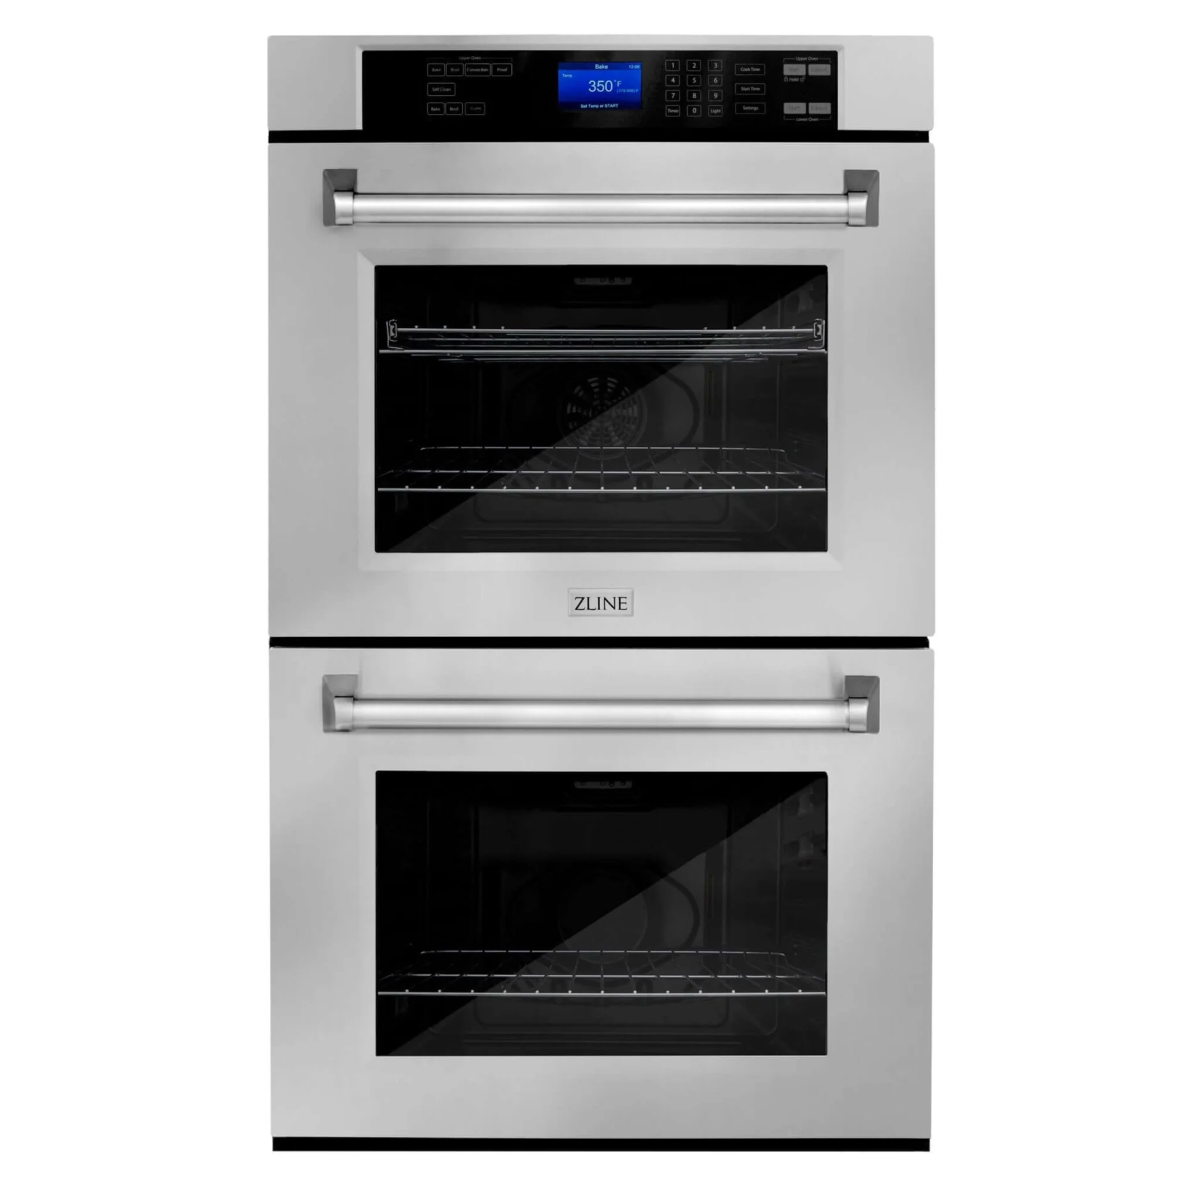 A stainless steel double oven is against a white background.